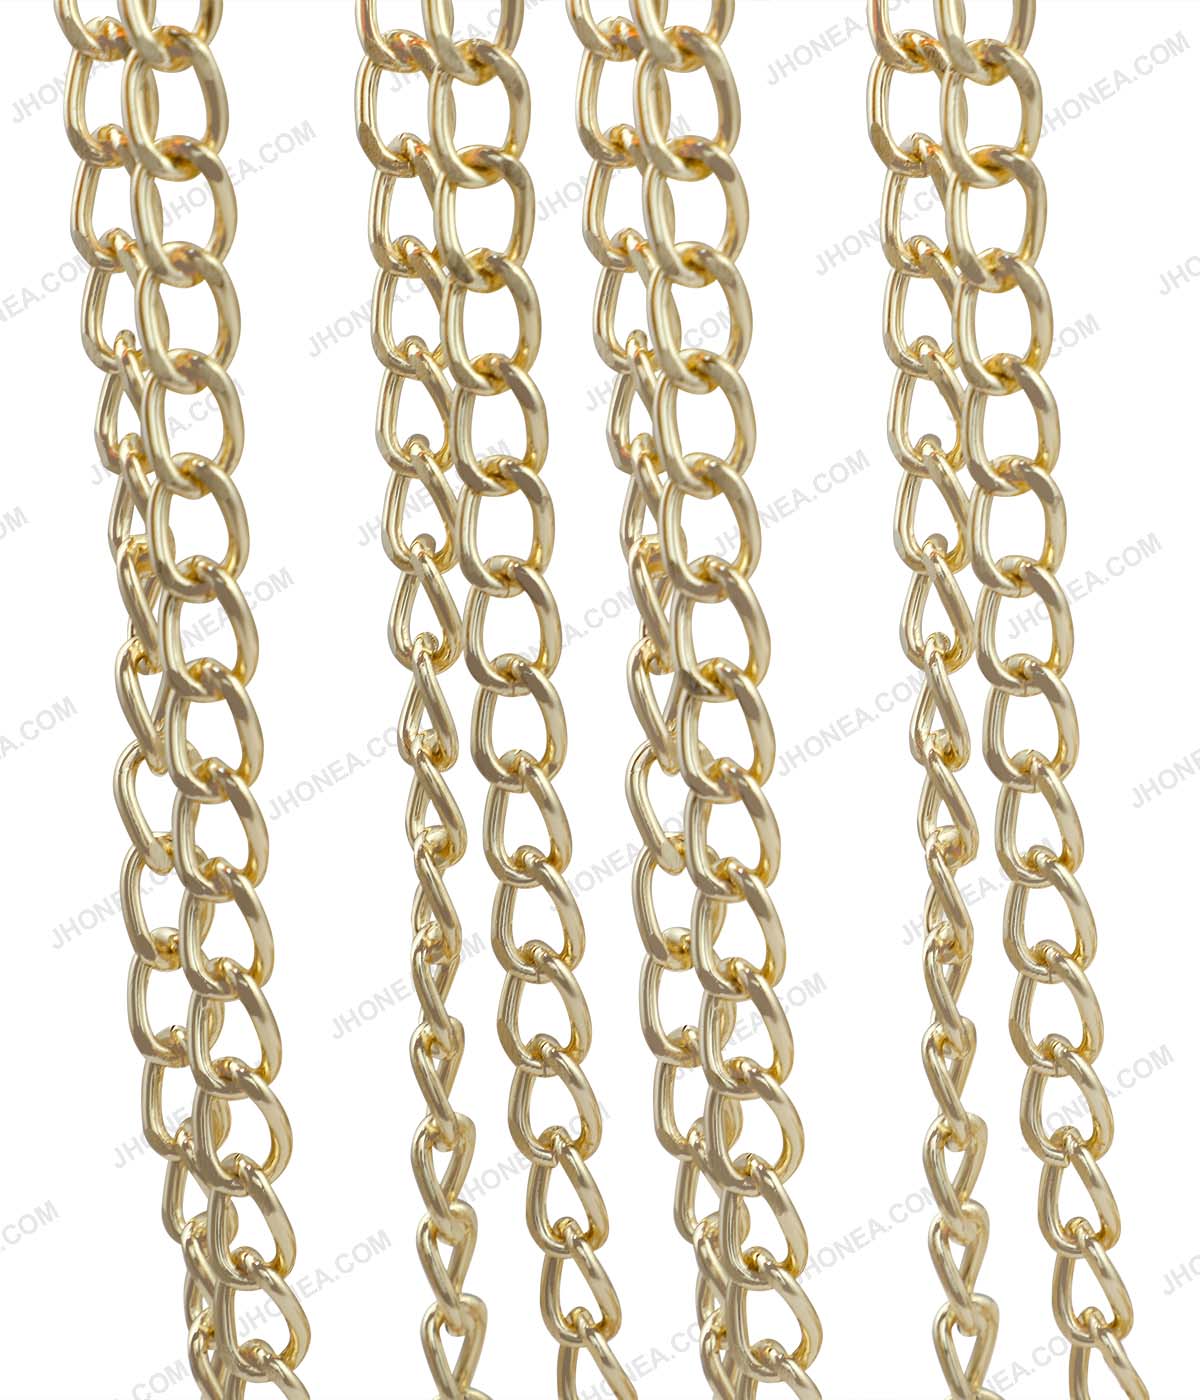 Shiny Gold Fashion Metal Curved Curb Link Chain